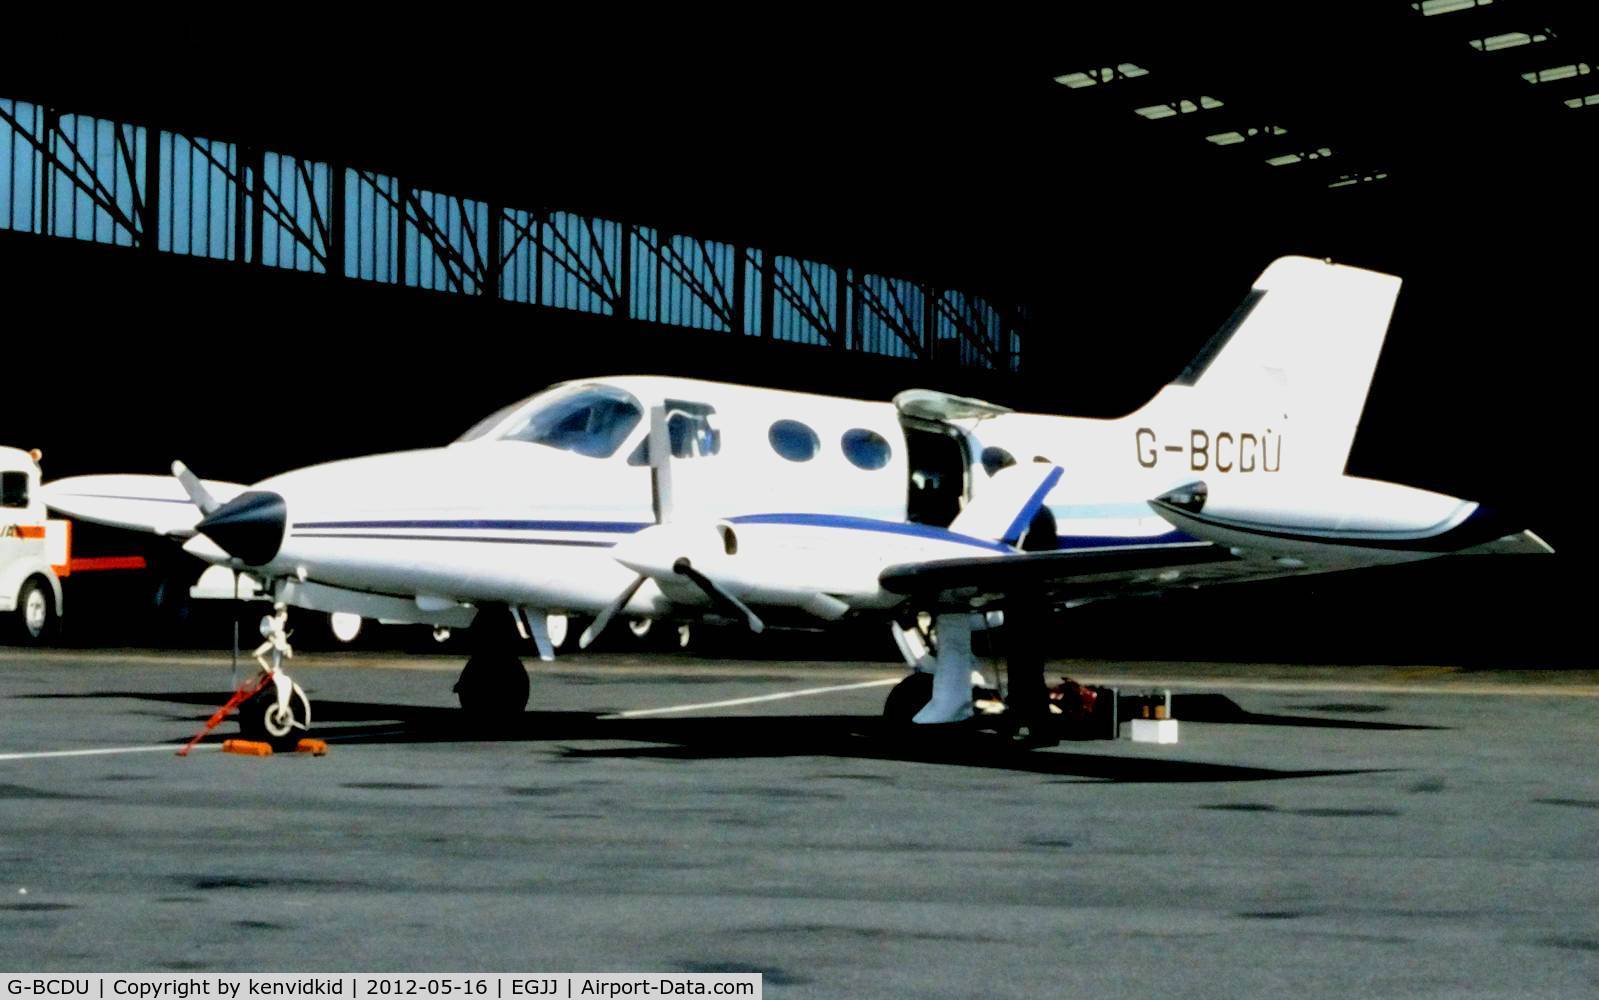 G-BCDU, 1974 Cessna 414 Chancellor C/N 414-0493, At Jersey airport early 1970's.
Scanned from slide.